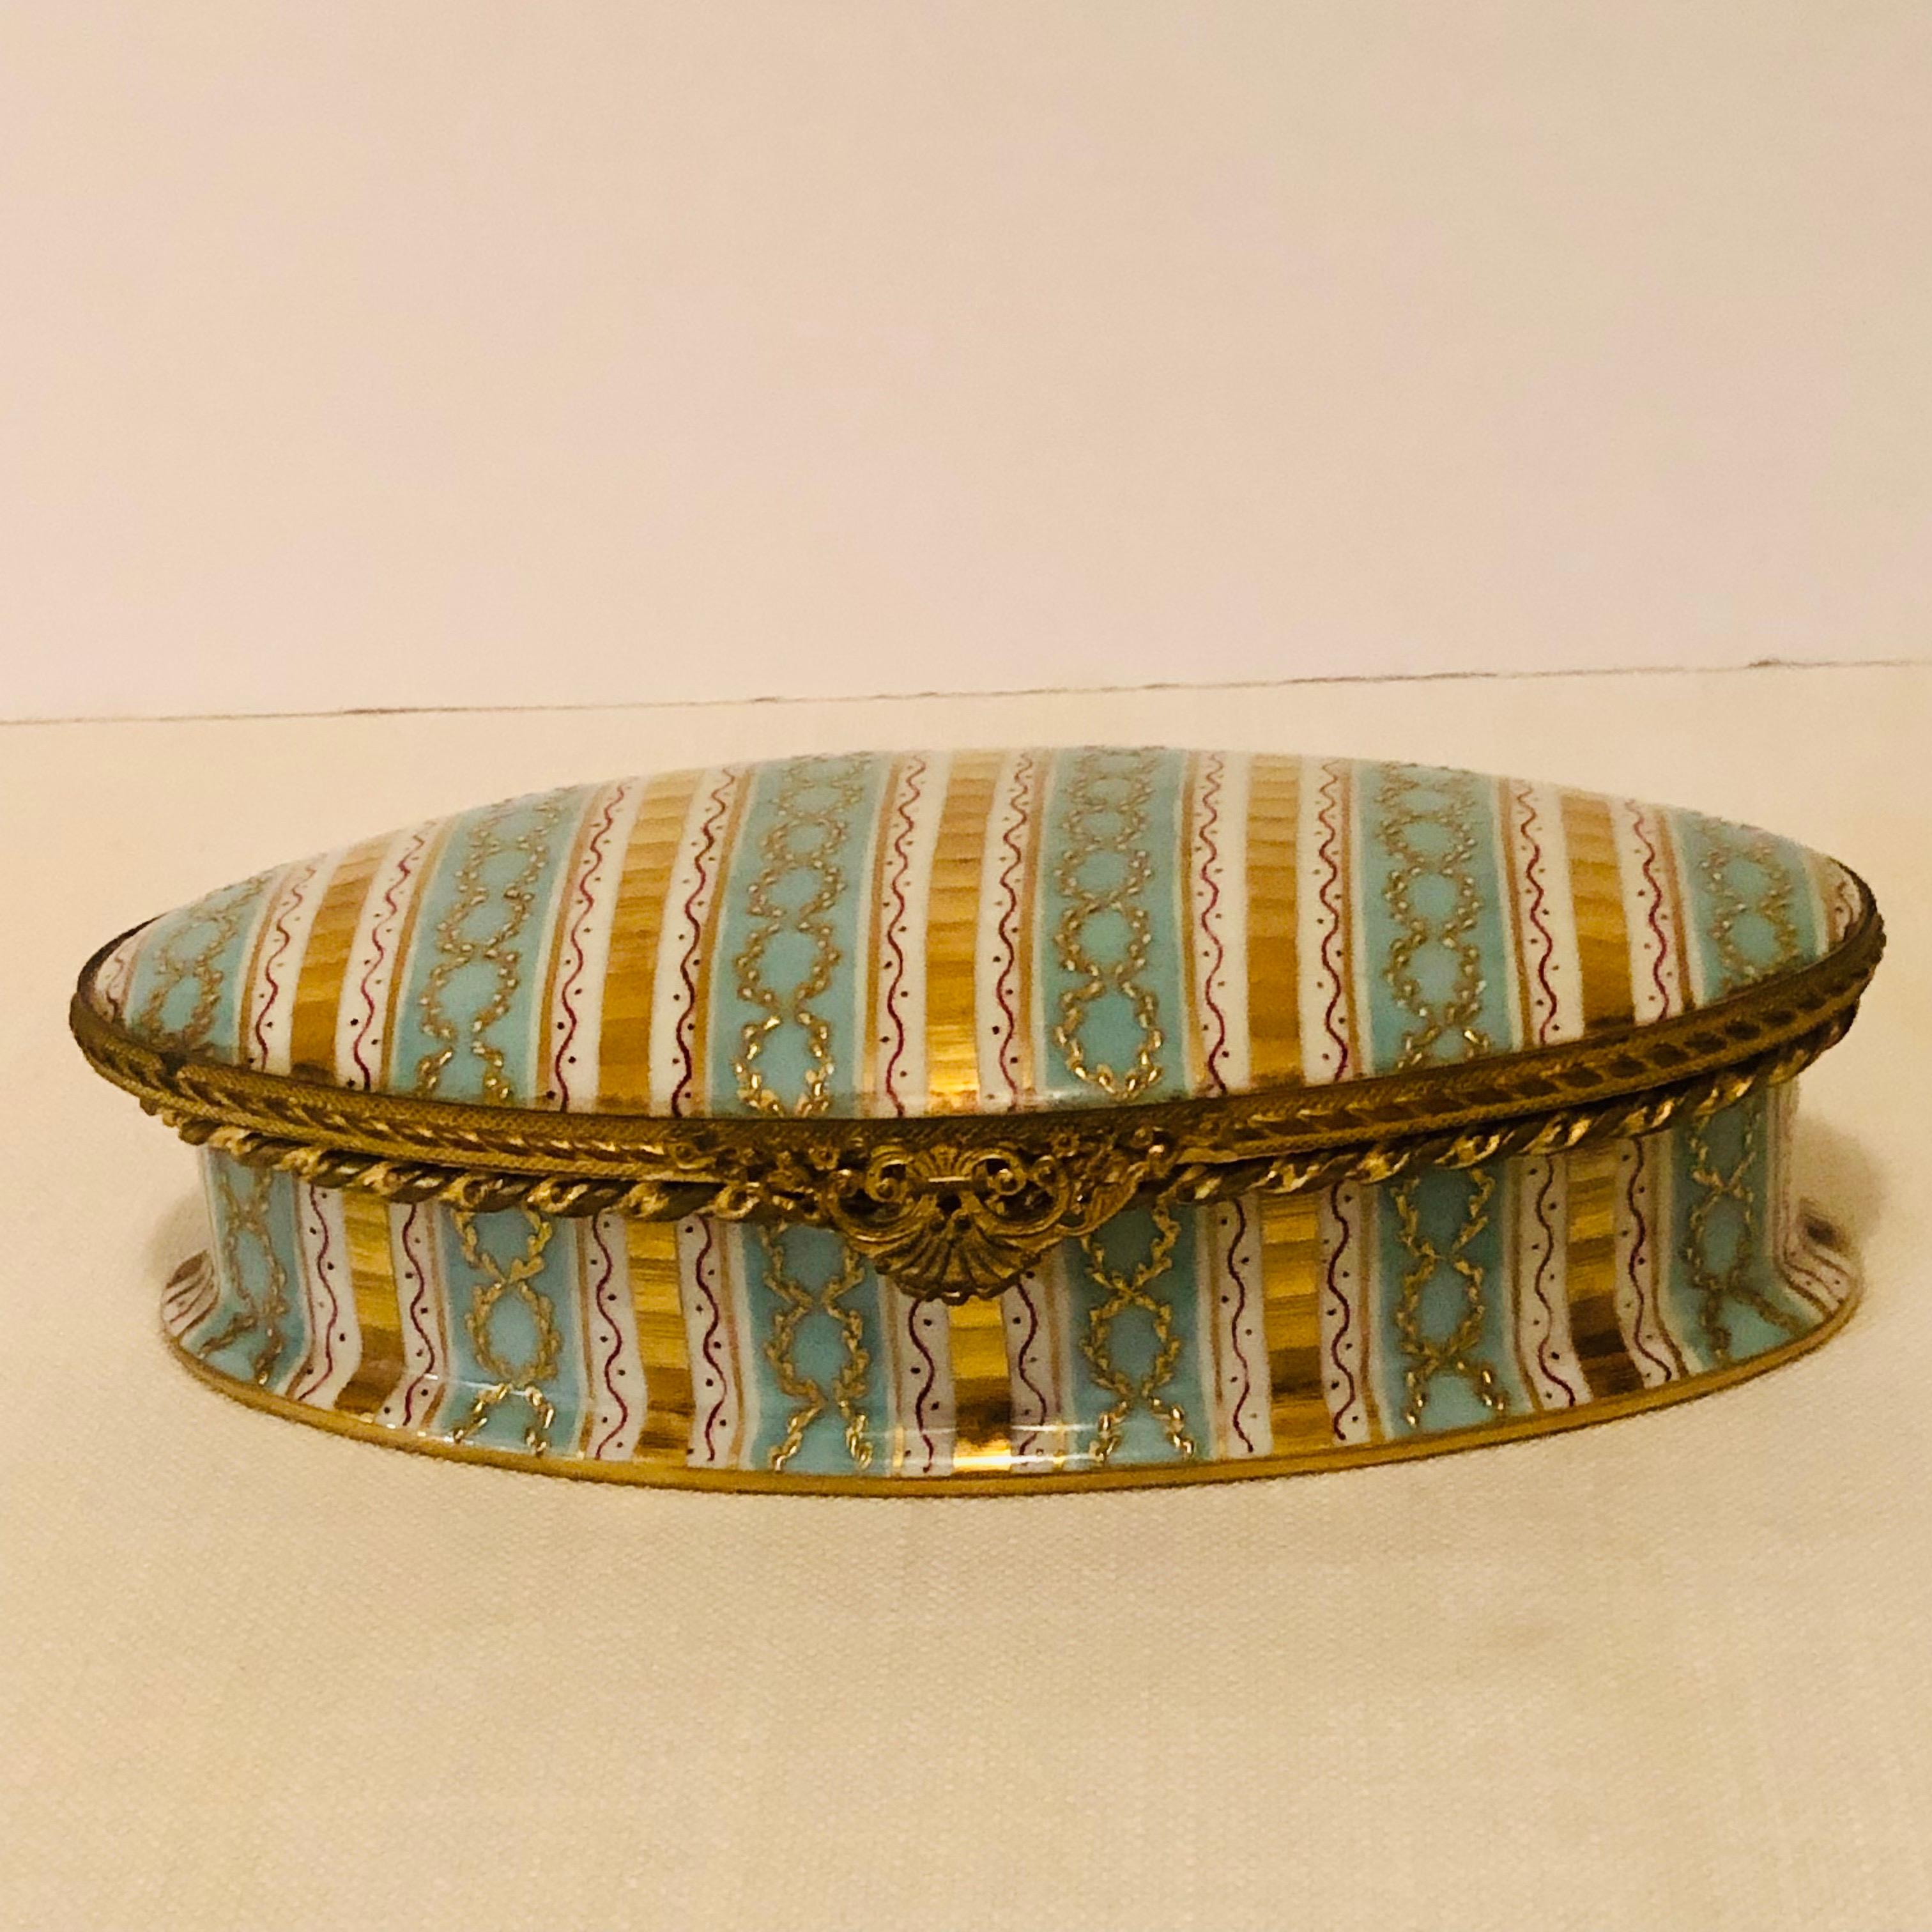 This is a beautiful Le Tallec box with aqua and gold stripes on a white ground. It has a decoration of raised gilding in the form of circular chains on the aqua stripes. The ormolu around the box top and bottom is an intricate gold design, as you